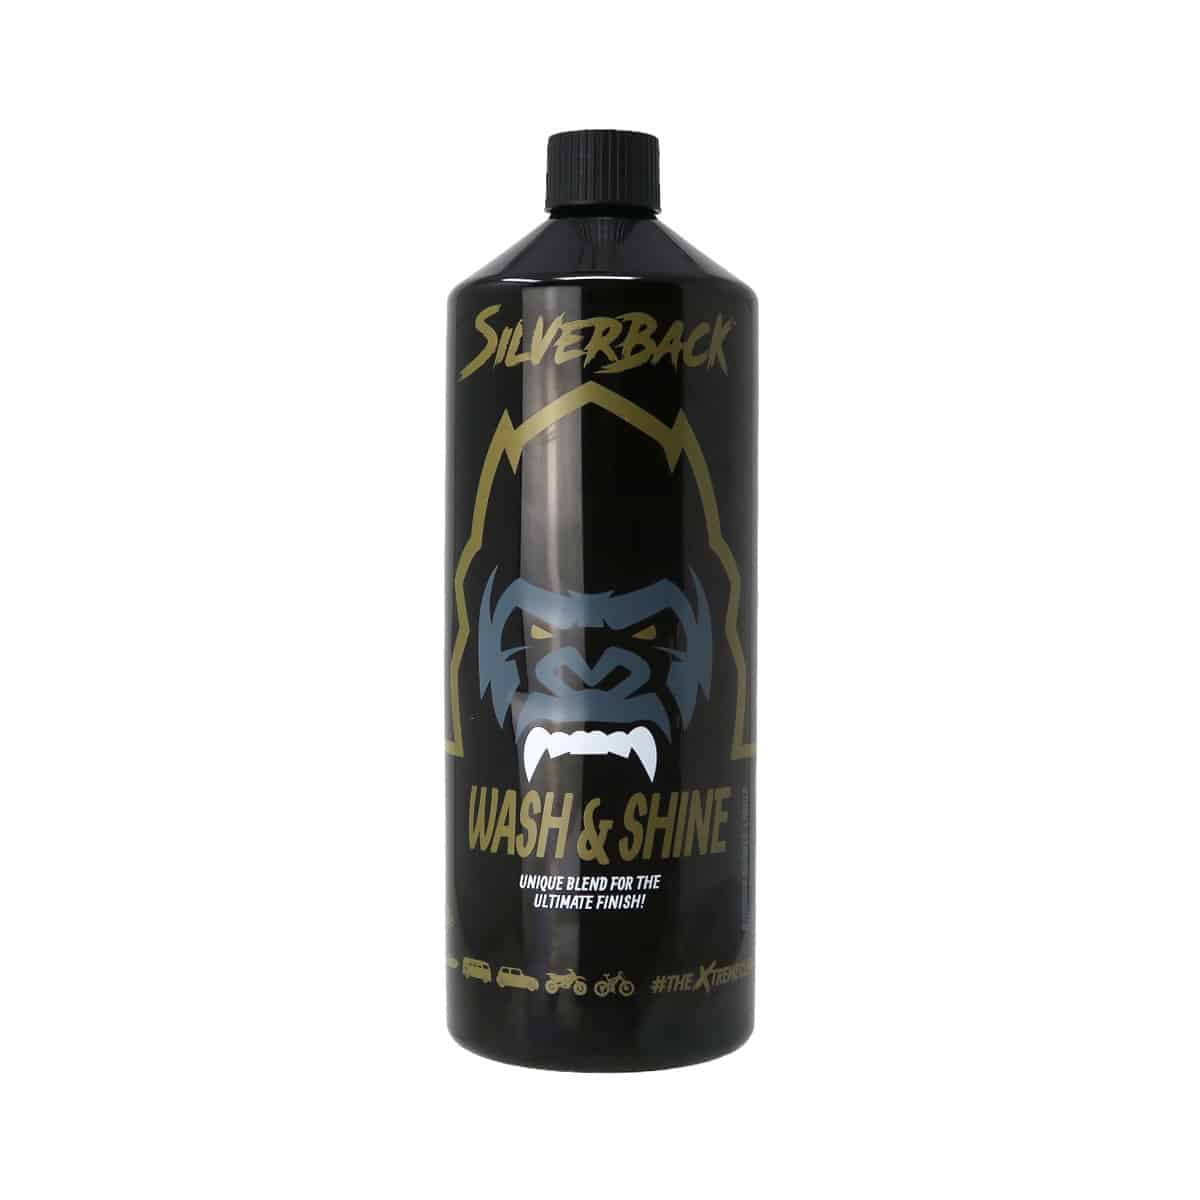 Silverback Wash & Shine: motorbike shampoo for a great clean, leaving a protective layer & a brilliant shine